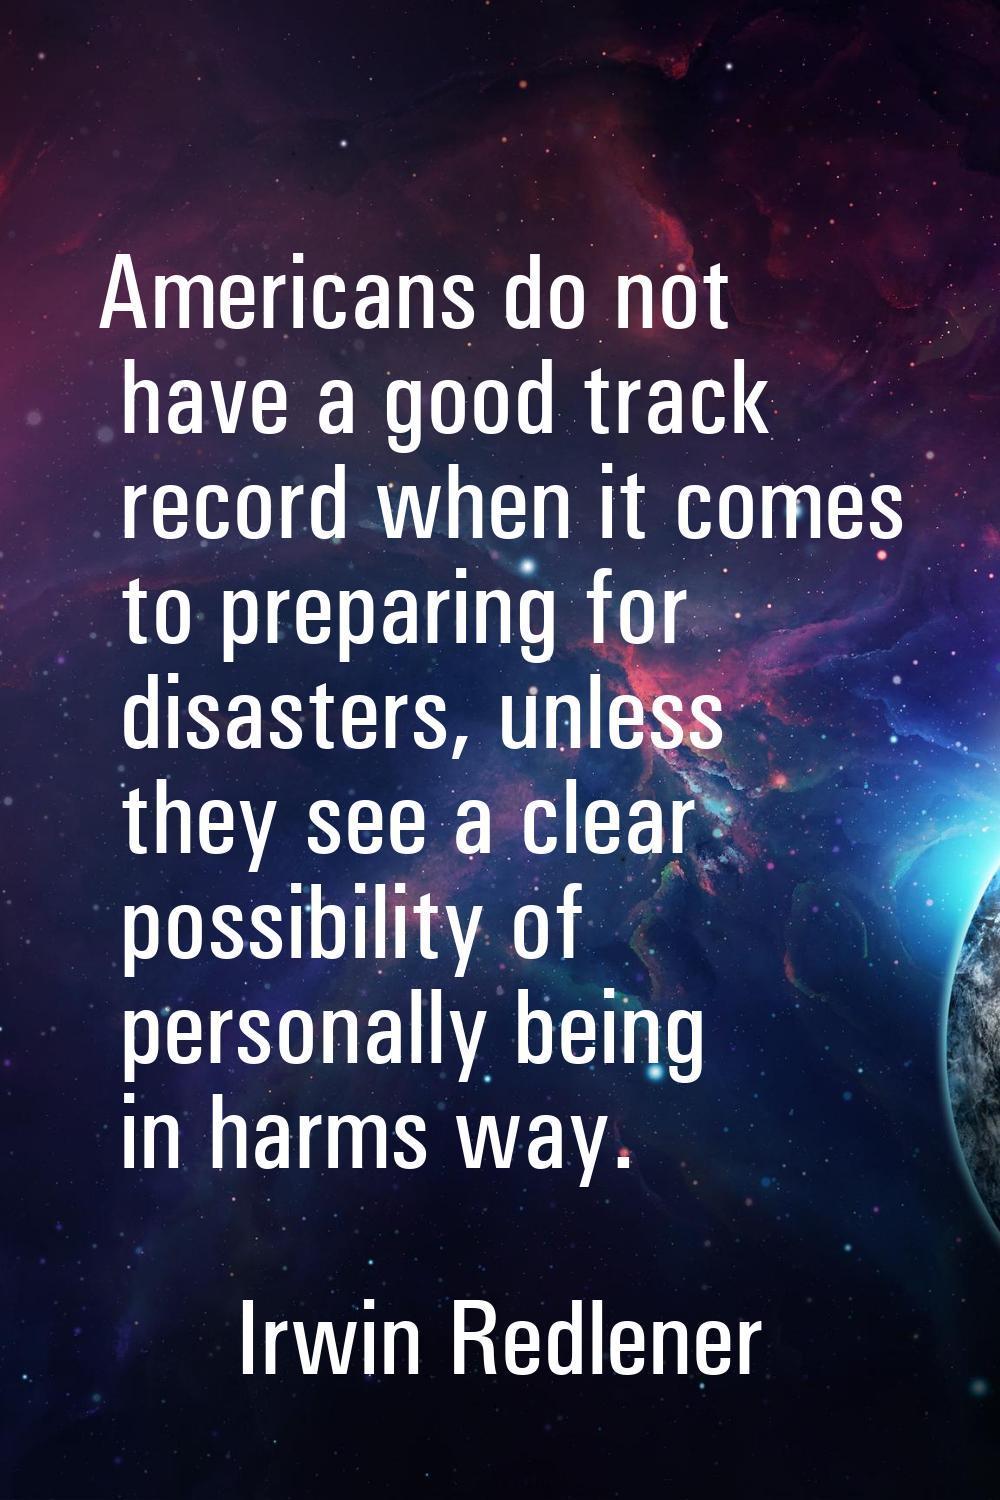 Americans do not have a good track record when it comes to preparing for disasters, unless they see